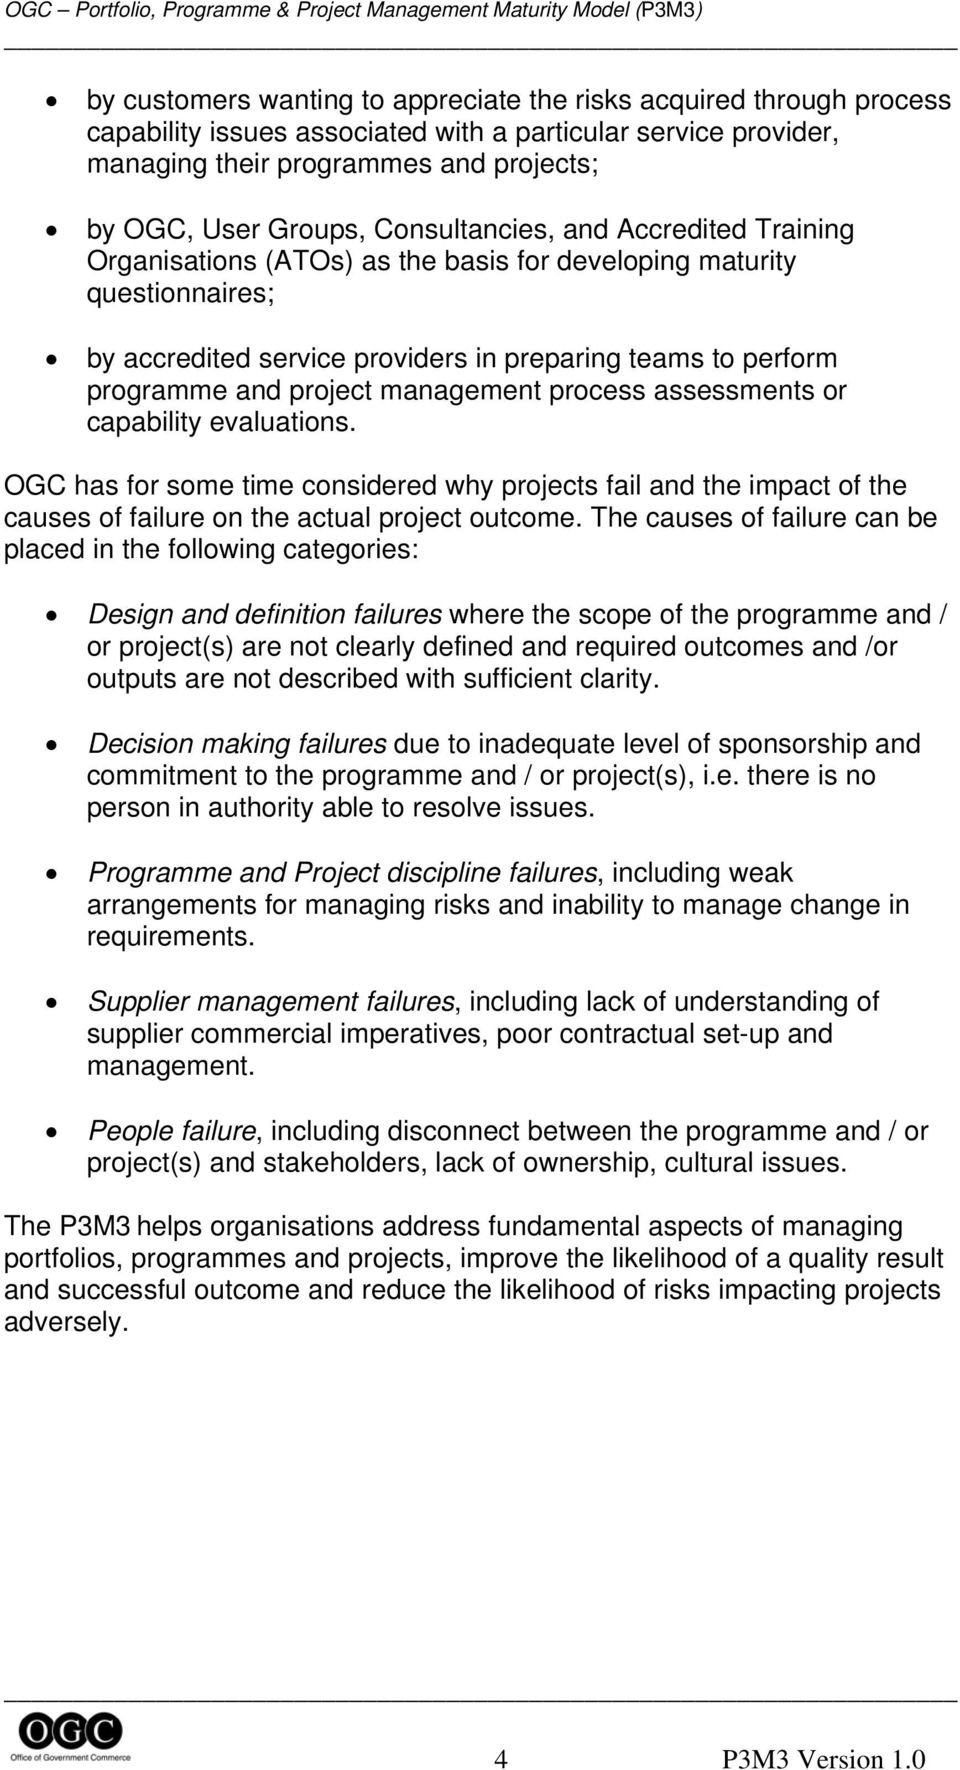 management process assessments or capability evaluations. OGC has for some time considered why projects fail and the impact of the causes of failure on the actual project outcome.